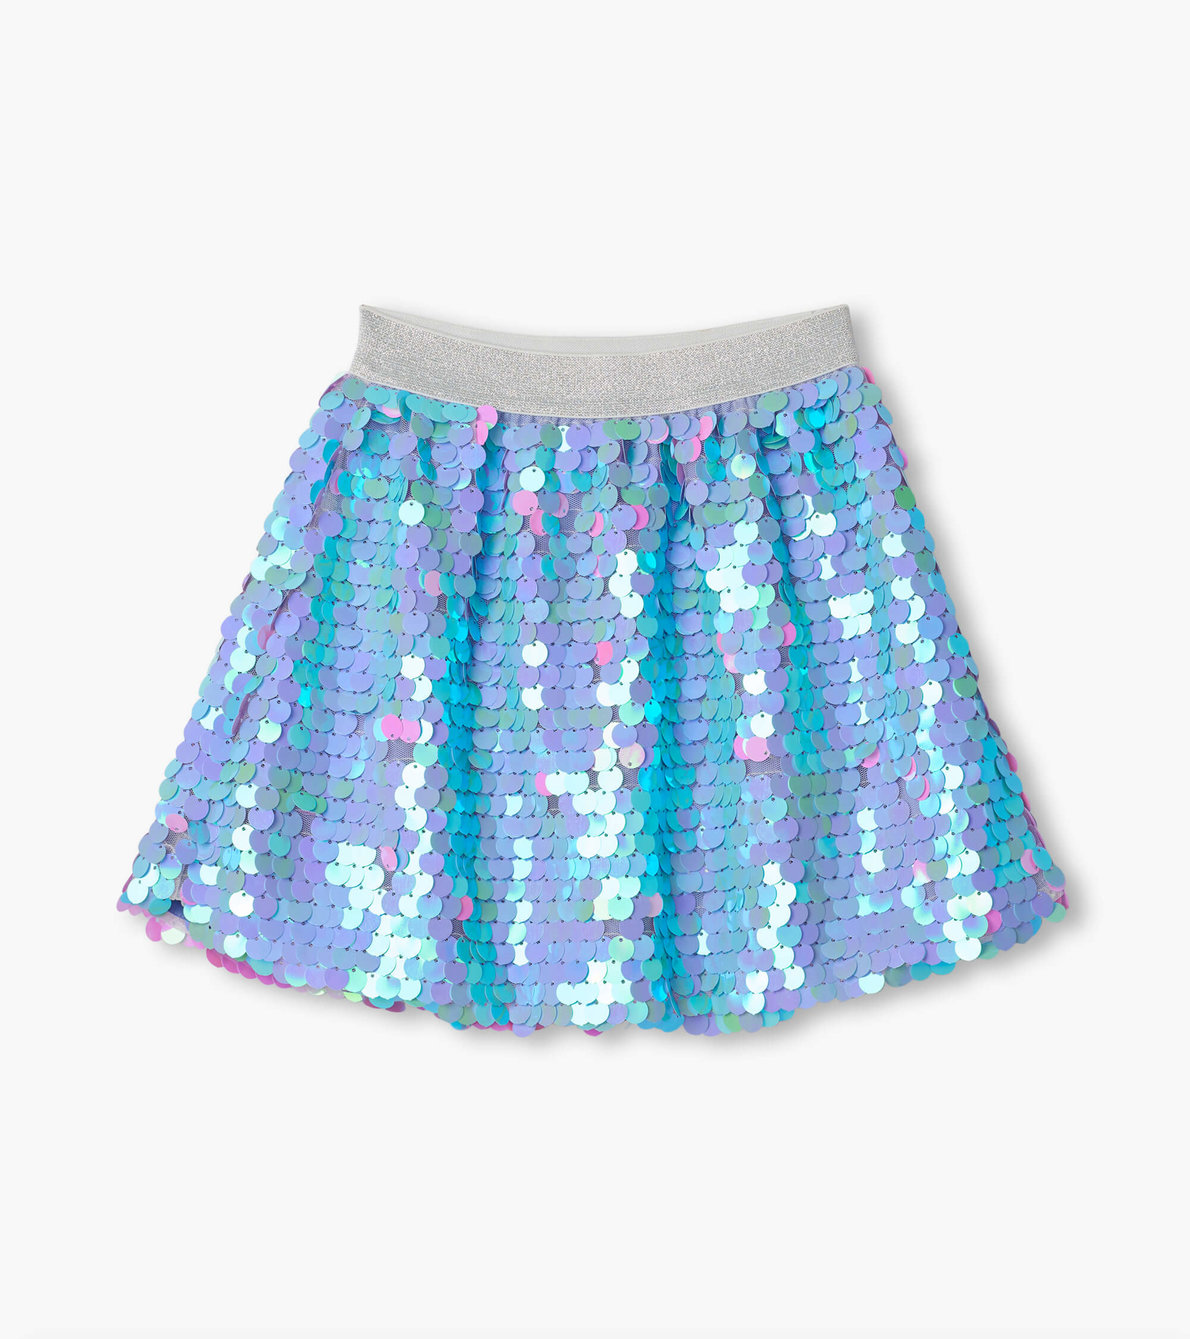 View larger image of Opalescent Purple Sequin Skirt